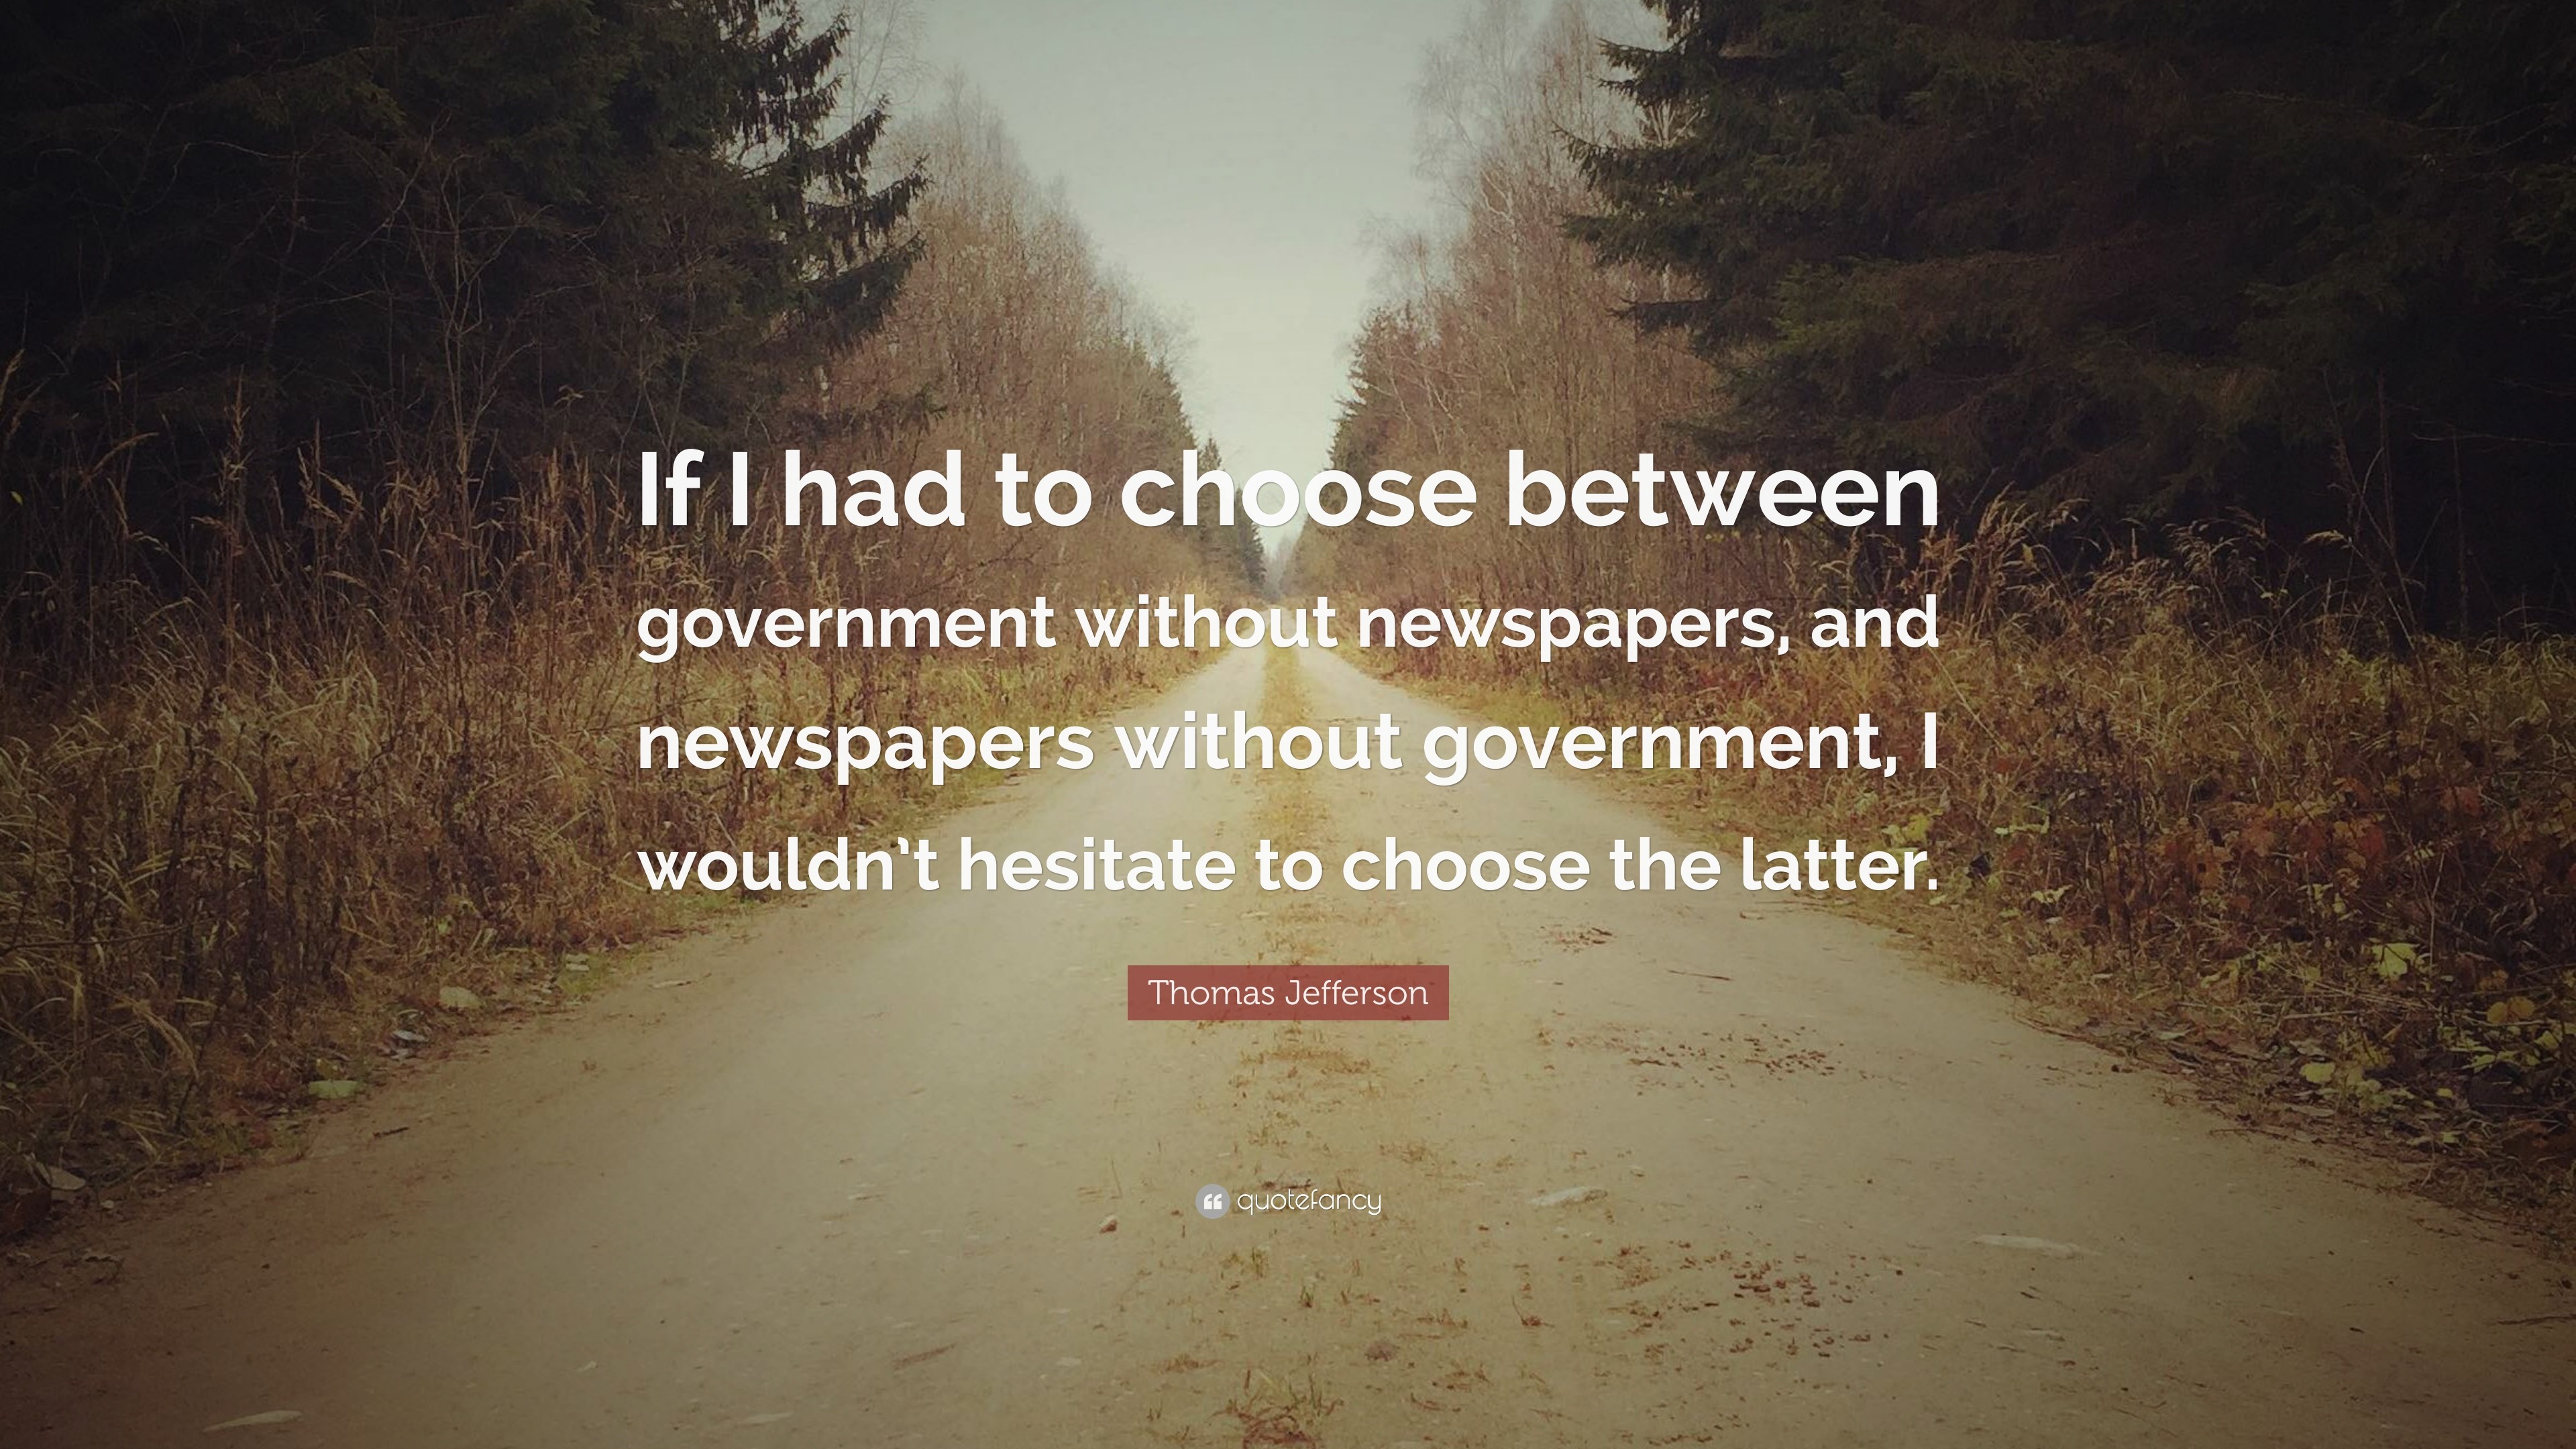 3840x2160 Thomas Jefferson Quote: “If I had to choose between government without  newspapers, and